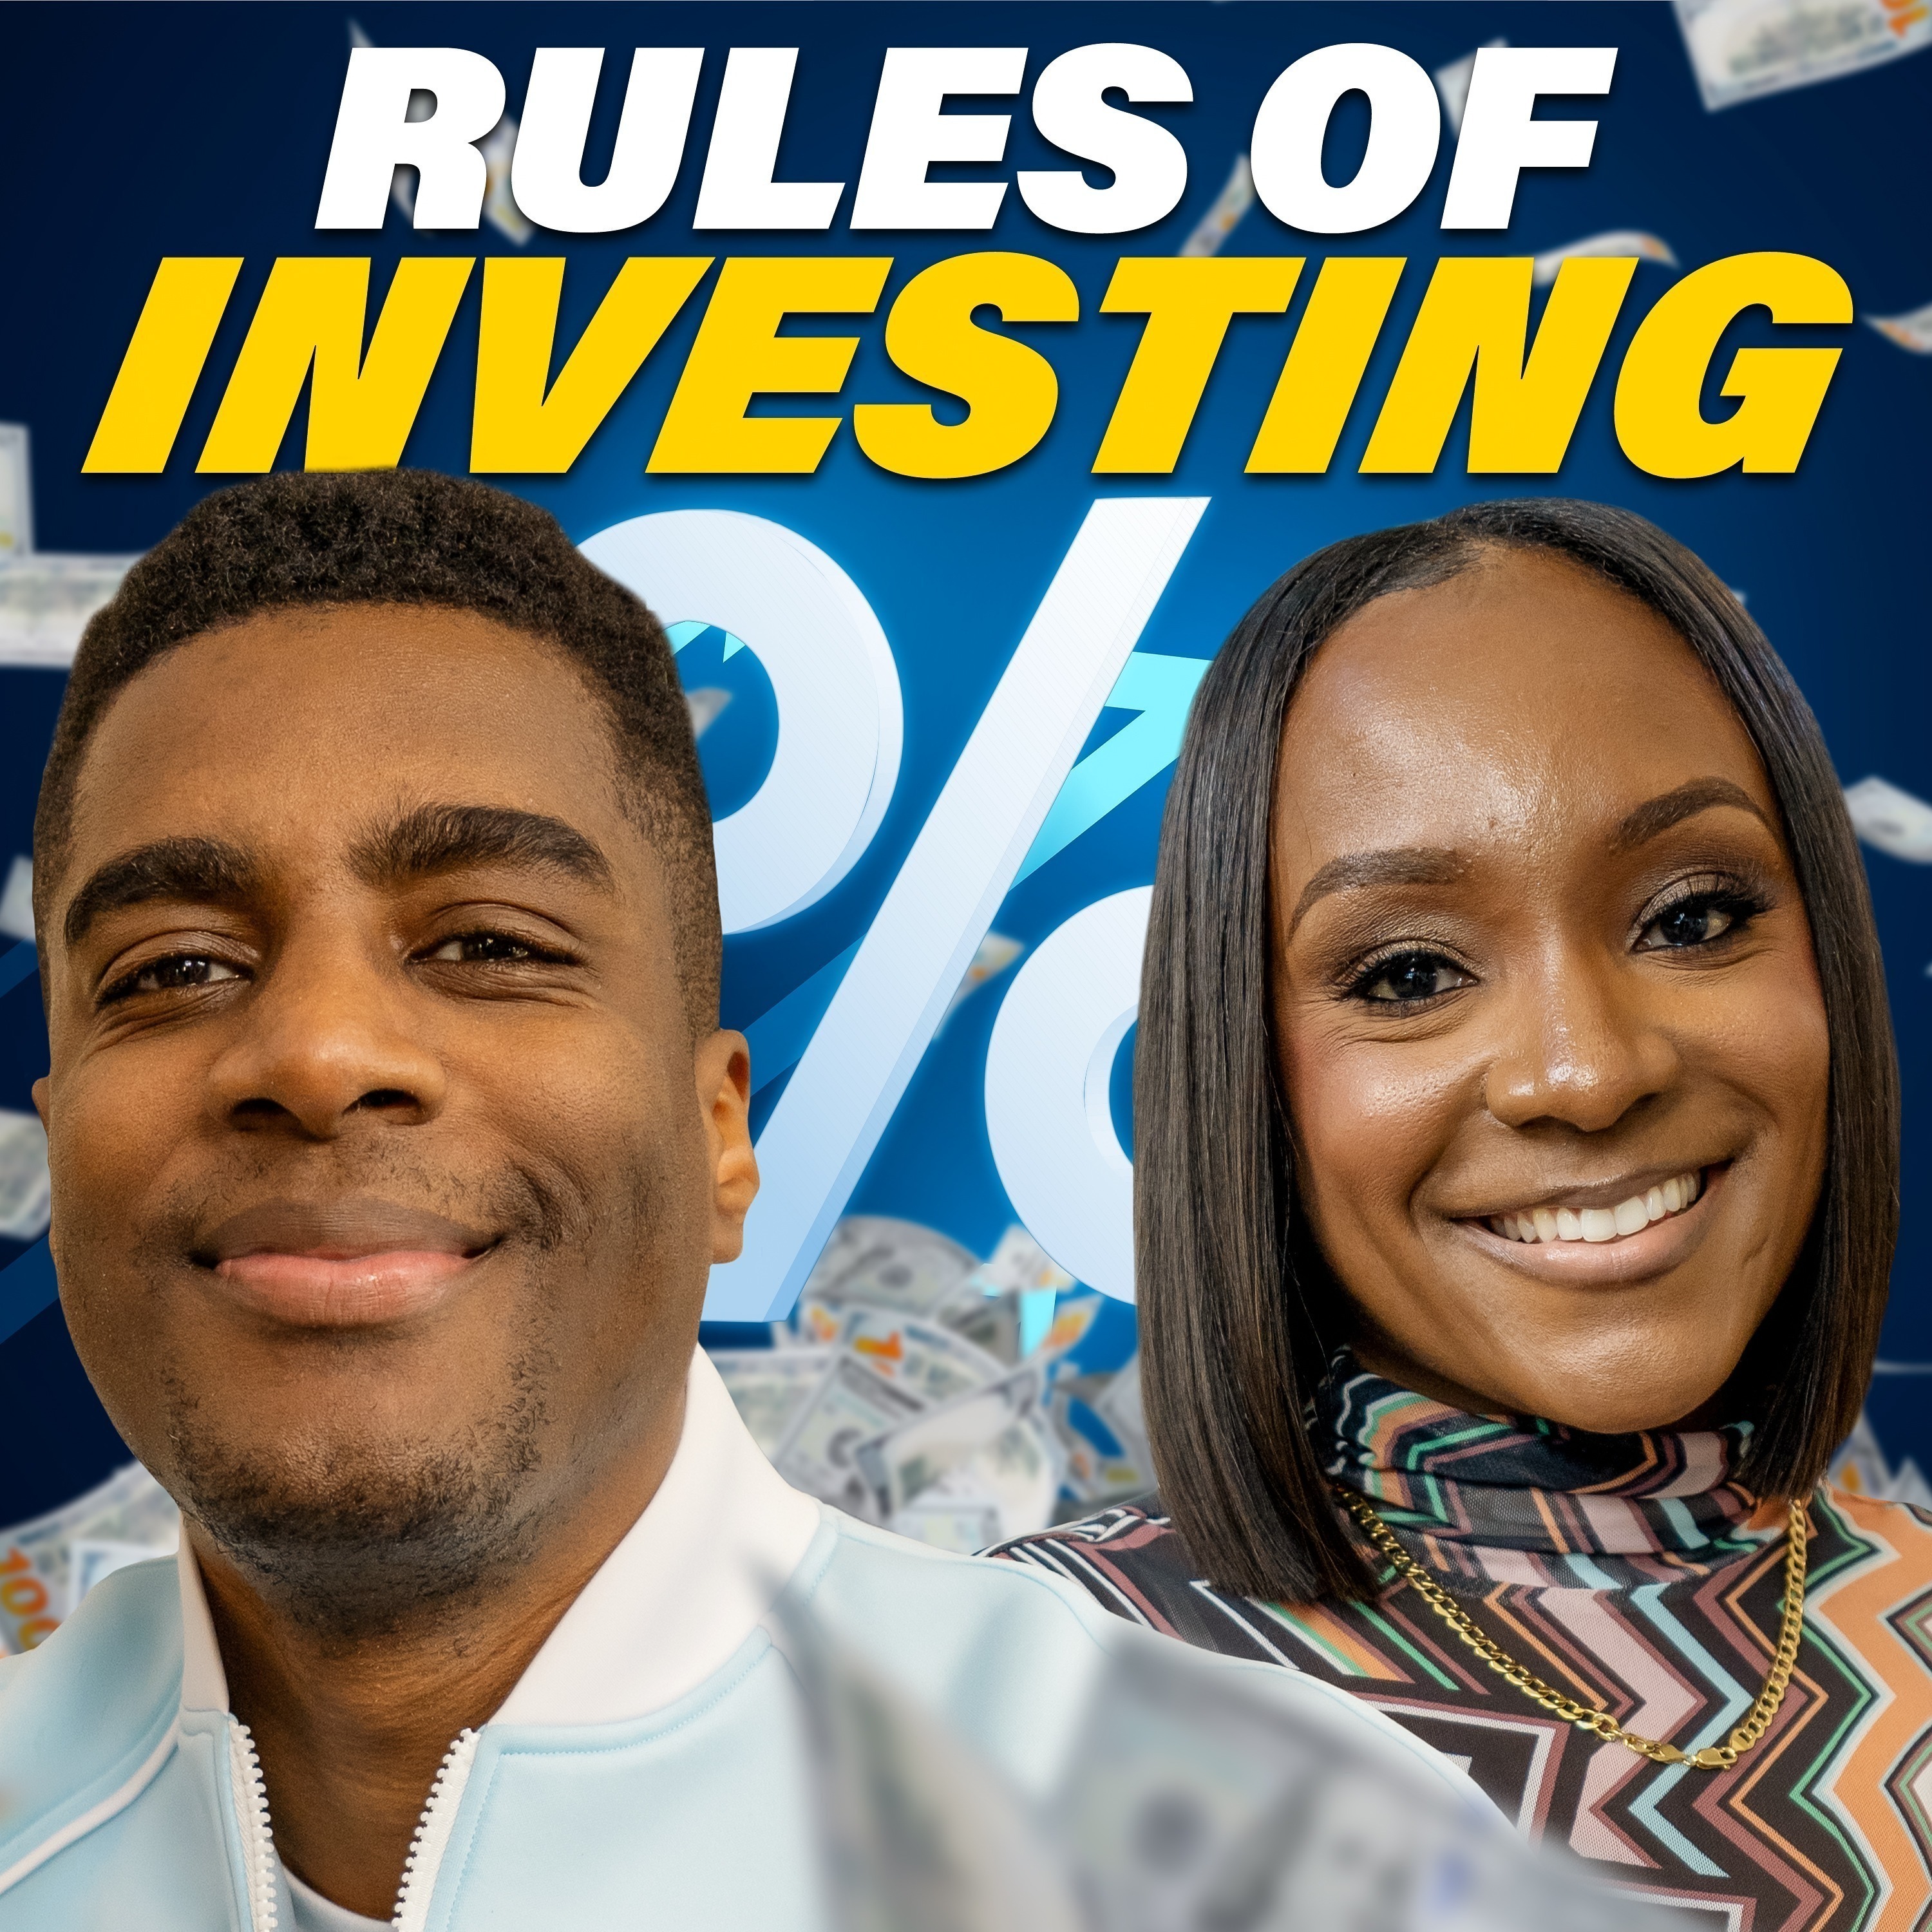 Former Wall Street Investor Reveals the Rules of Building Wealth!